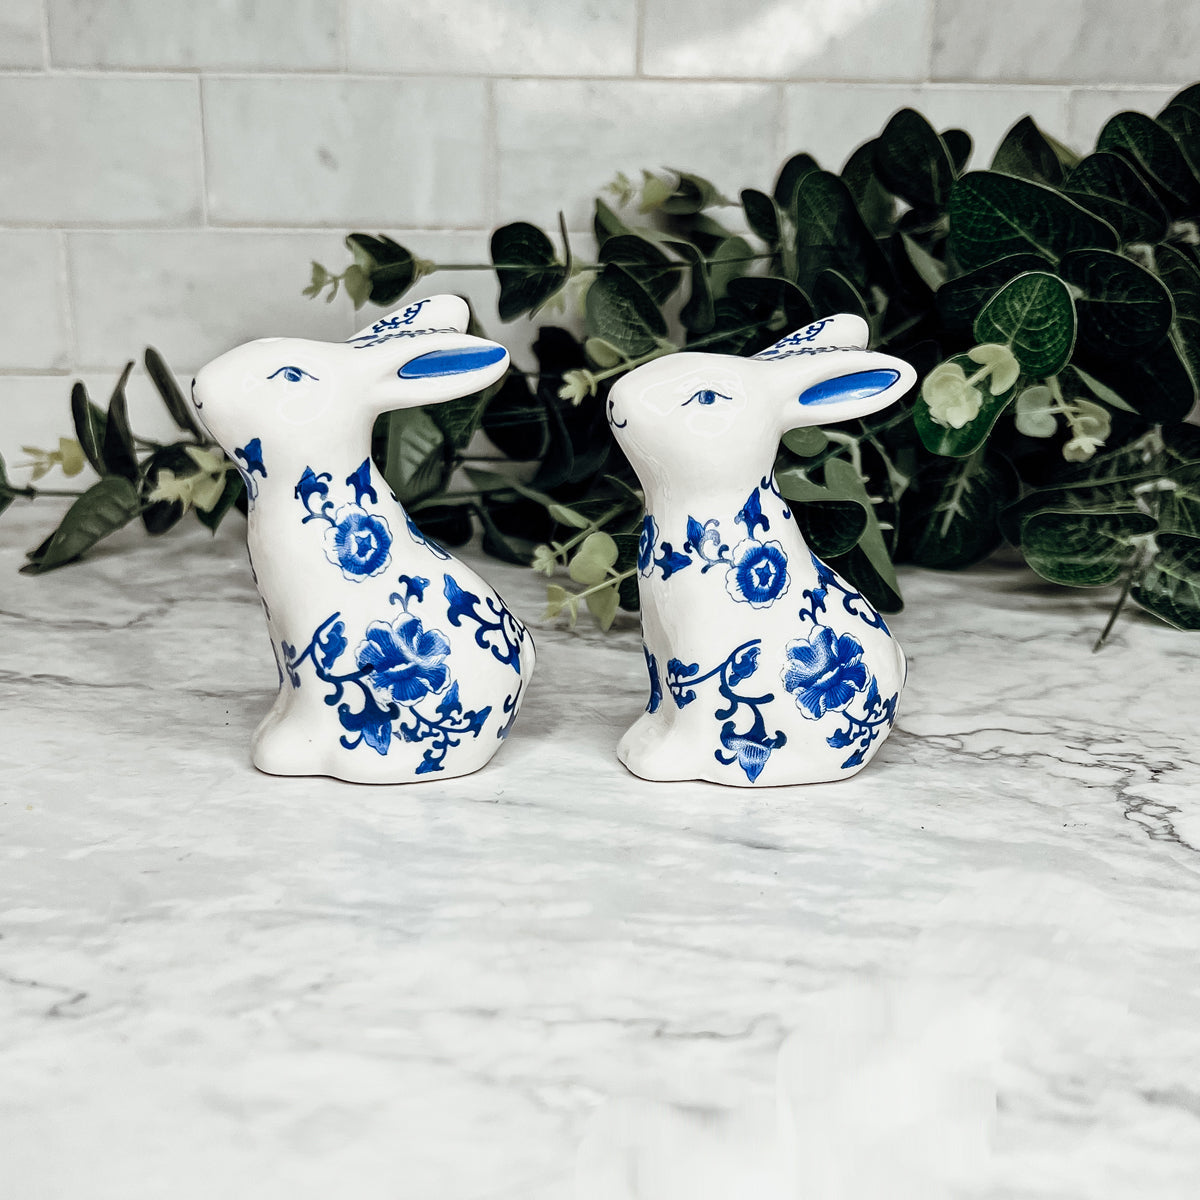 Blue and White Bunny Salt and Pepper Shakers